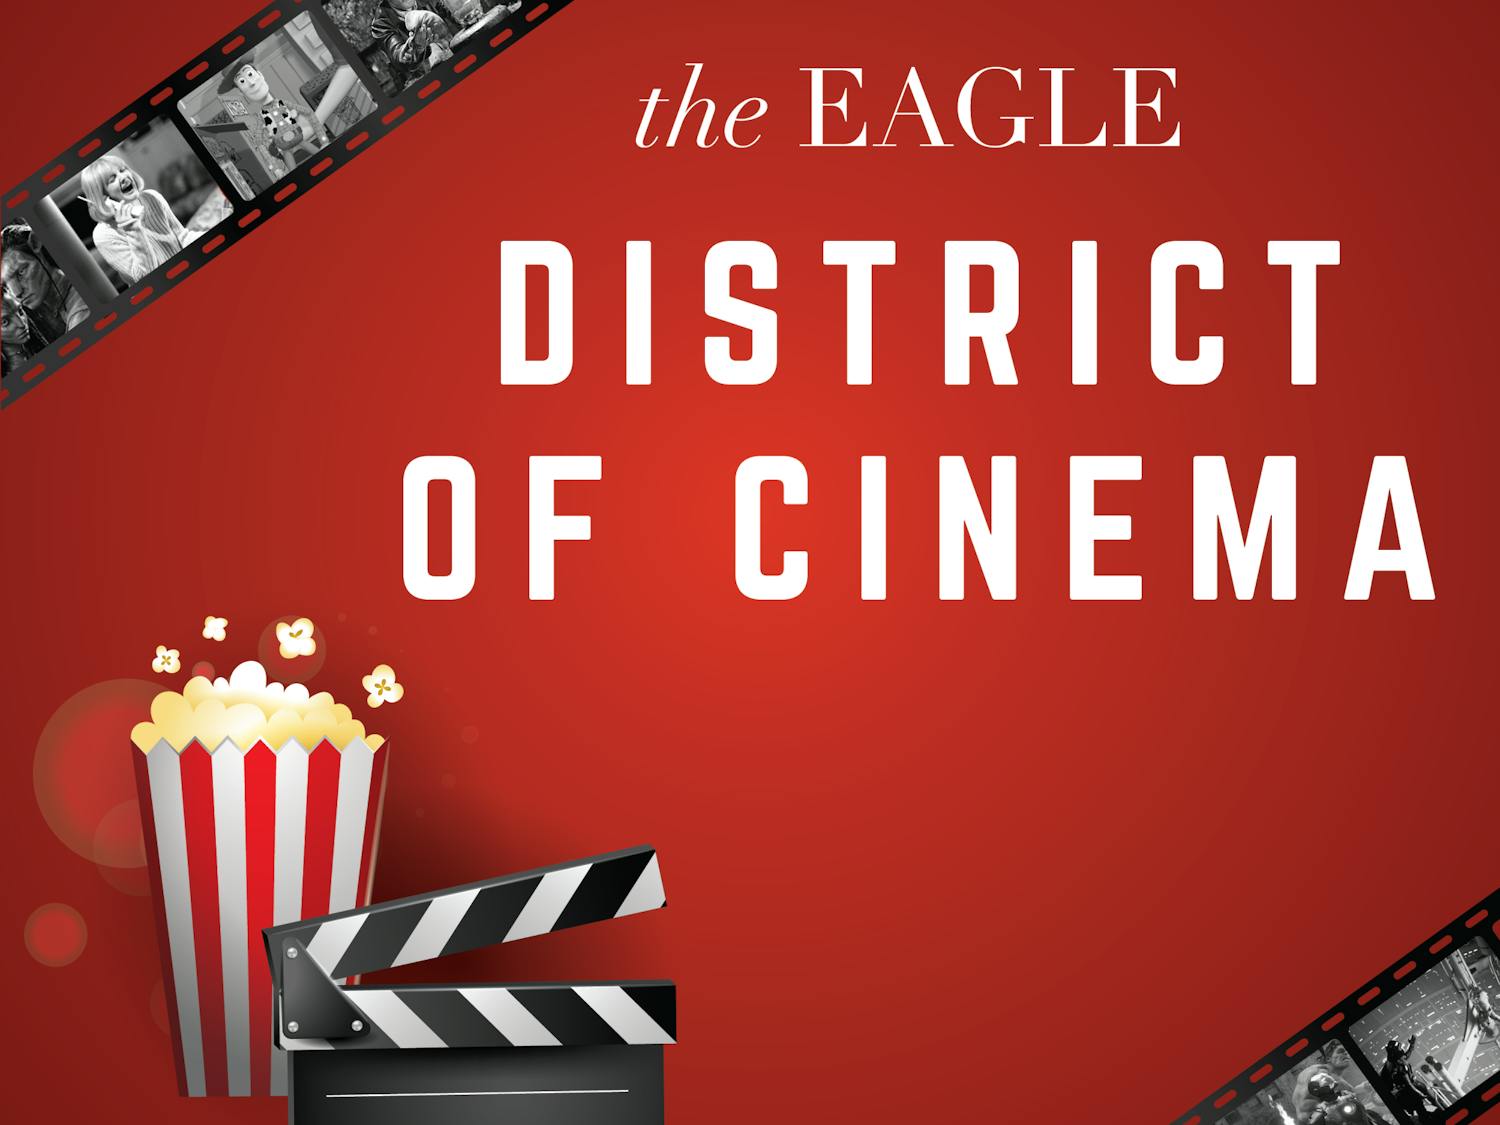 District Of Cinema - Cover Art-02.png